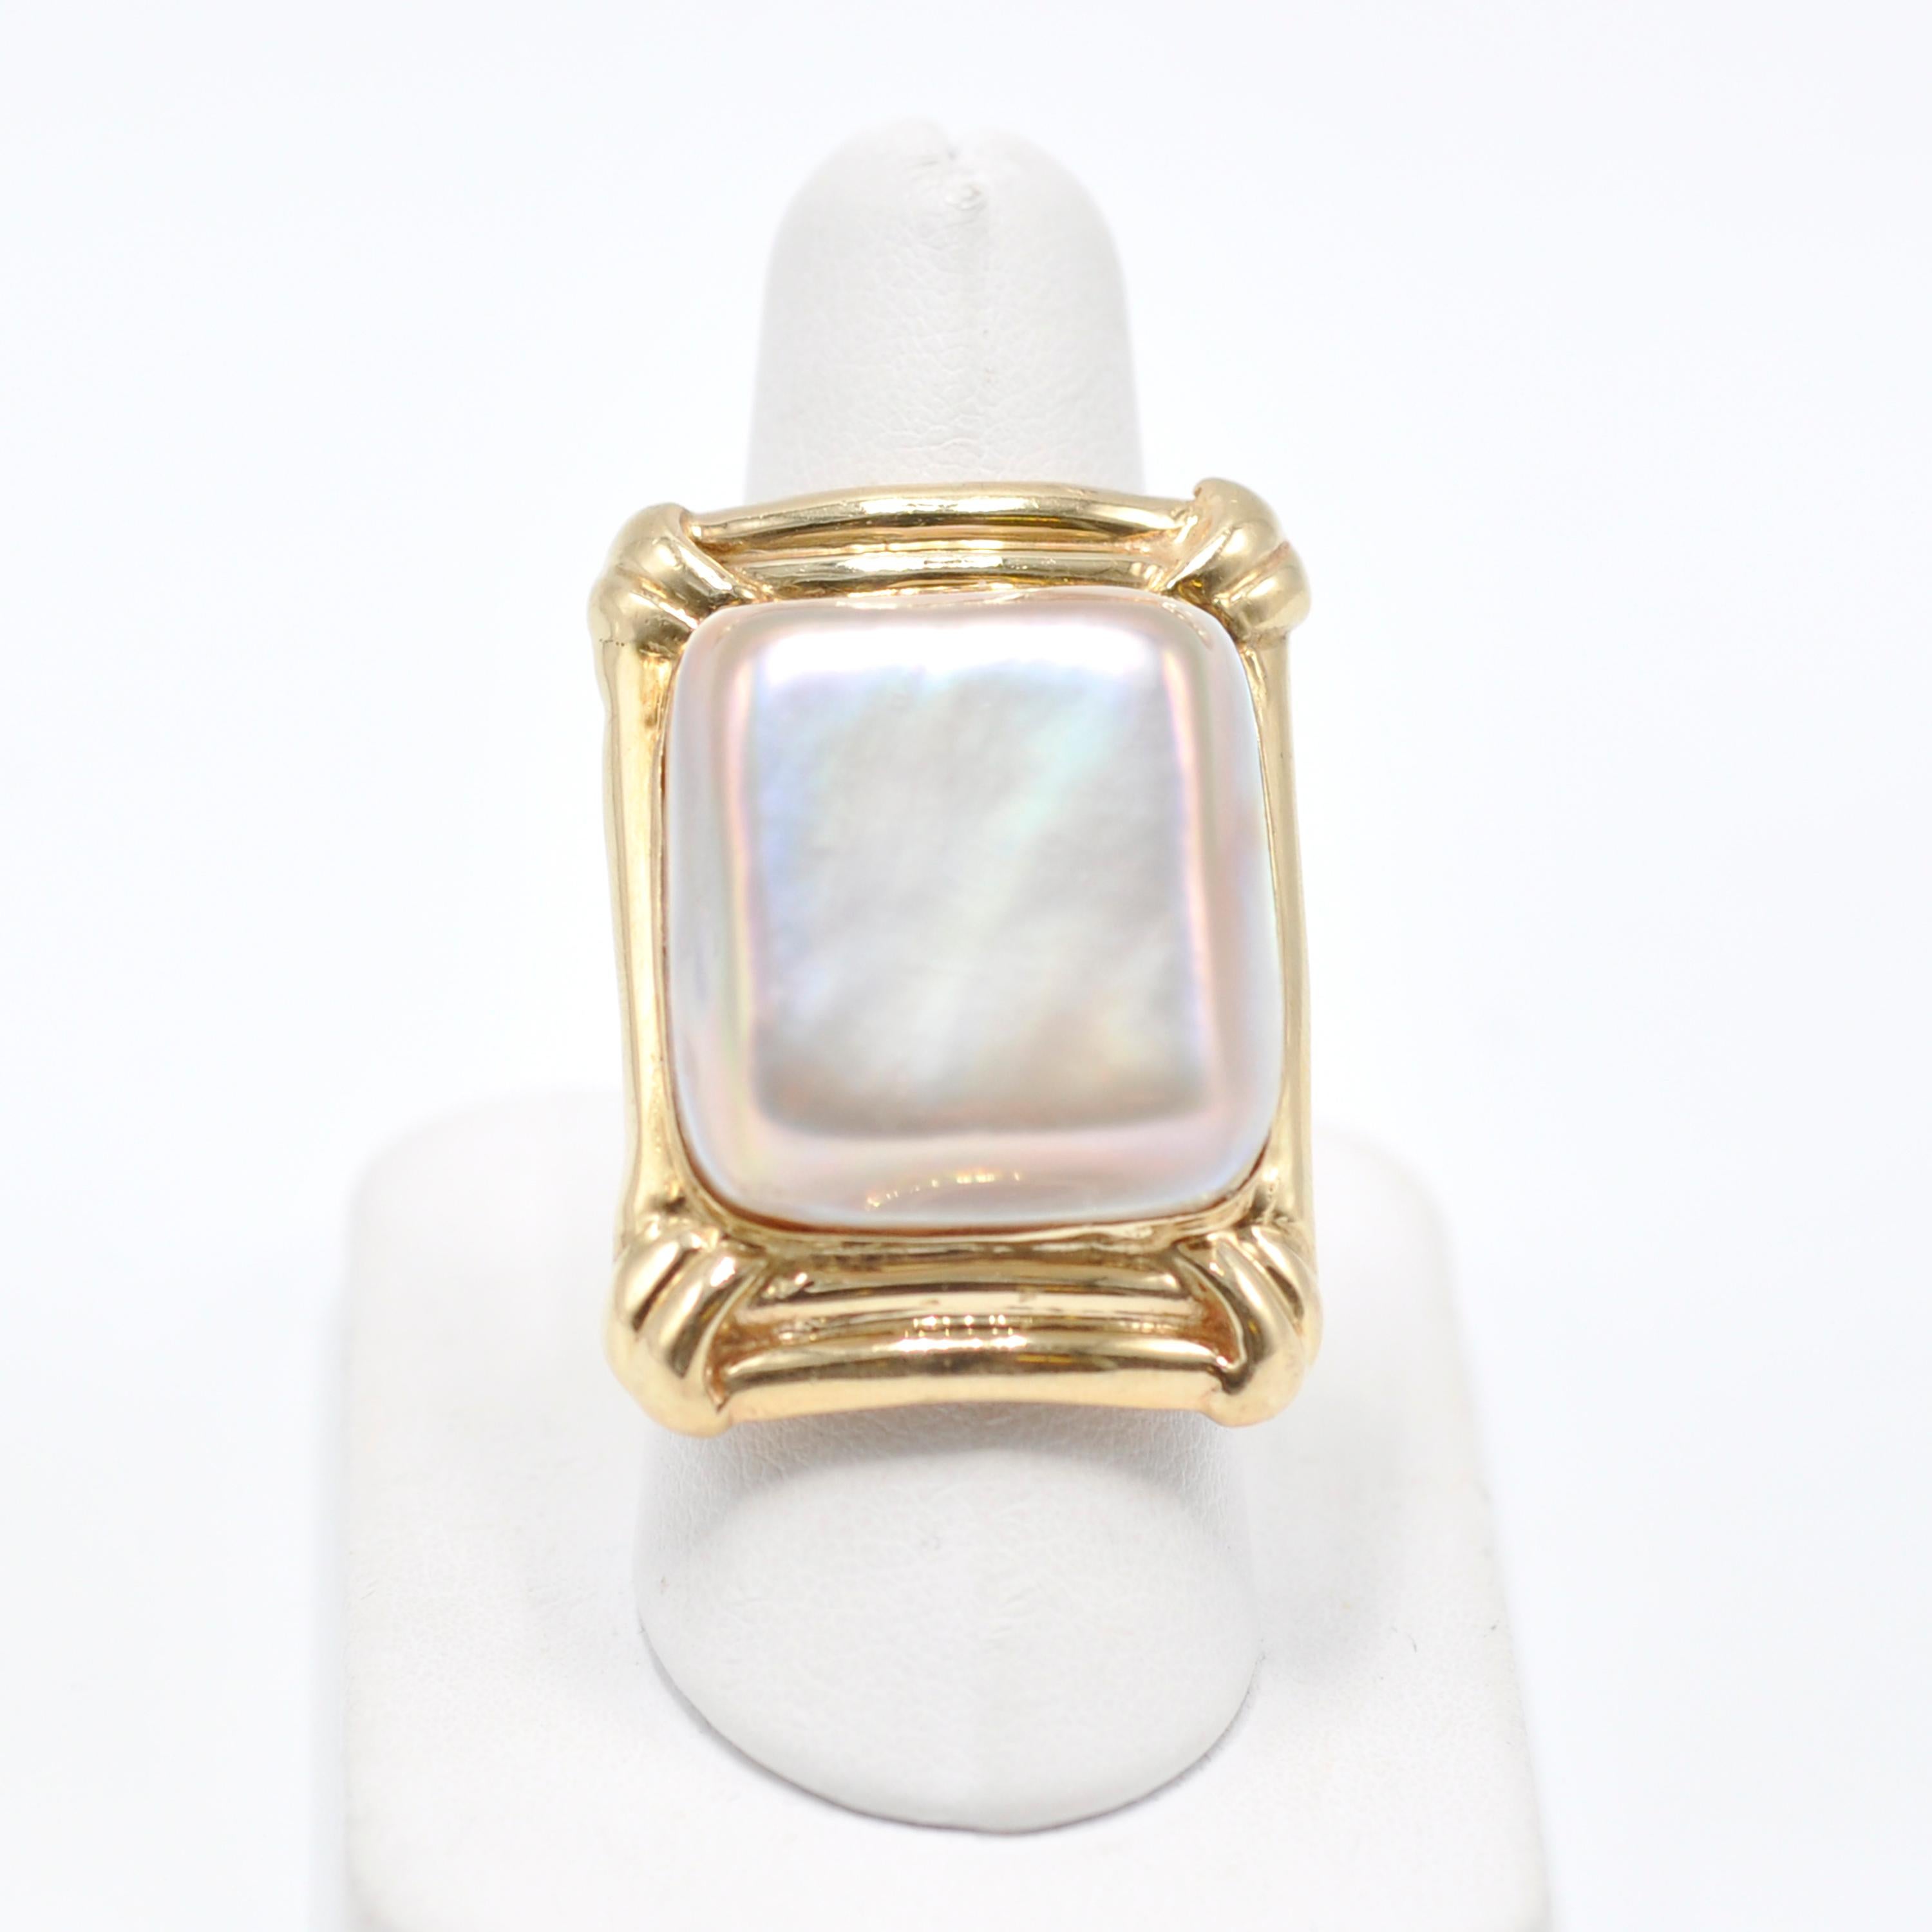 Our vintage 14 Karat Gold Mother of Pearl Ring is a bold statement added to any outfit. 

A large square cushion of Mother of Pearl sits atop a theatrical rectangular 14 karat gold setting. The irregularity of the design compliments the natural